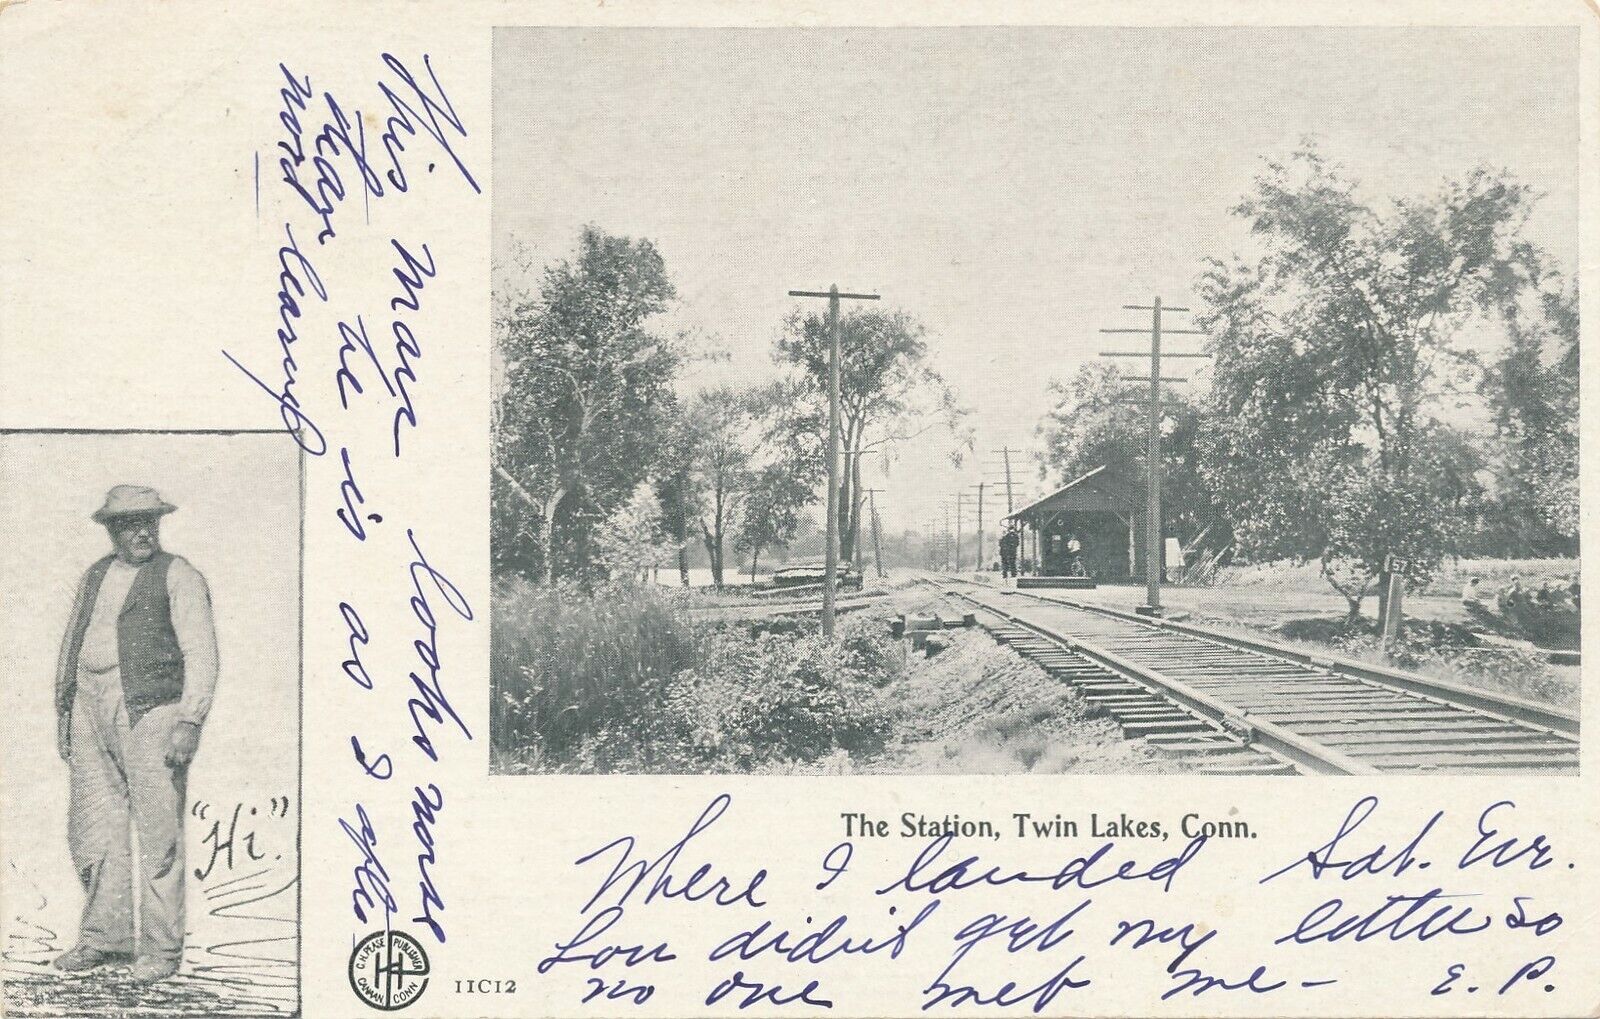 TWIN LAKES CT – The Railroad Station - udb (pre 1908)